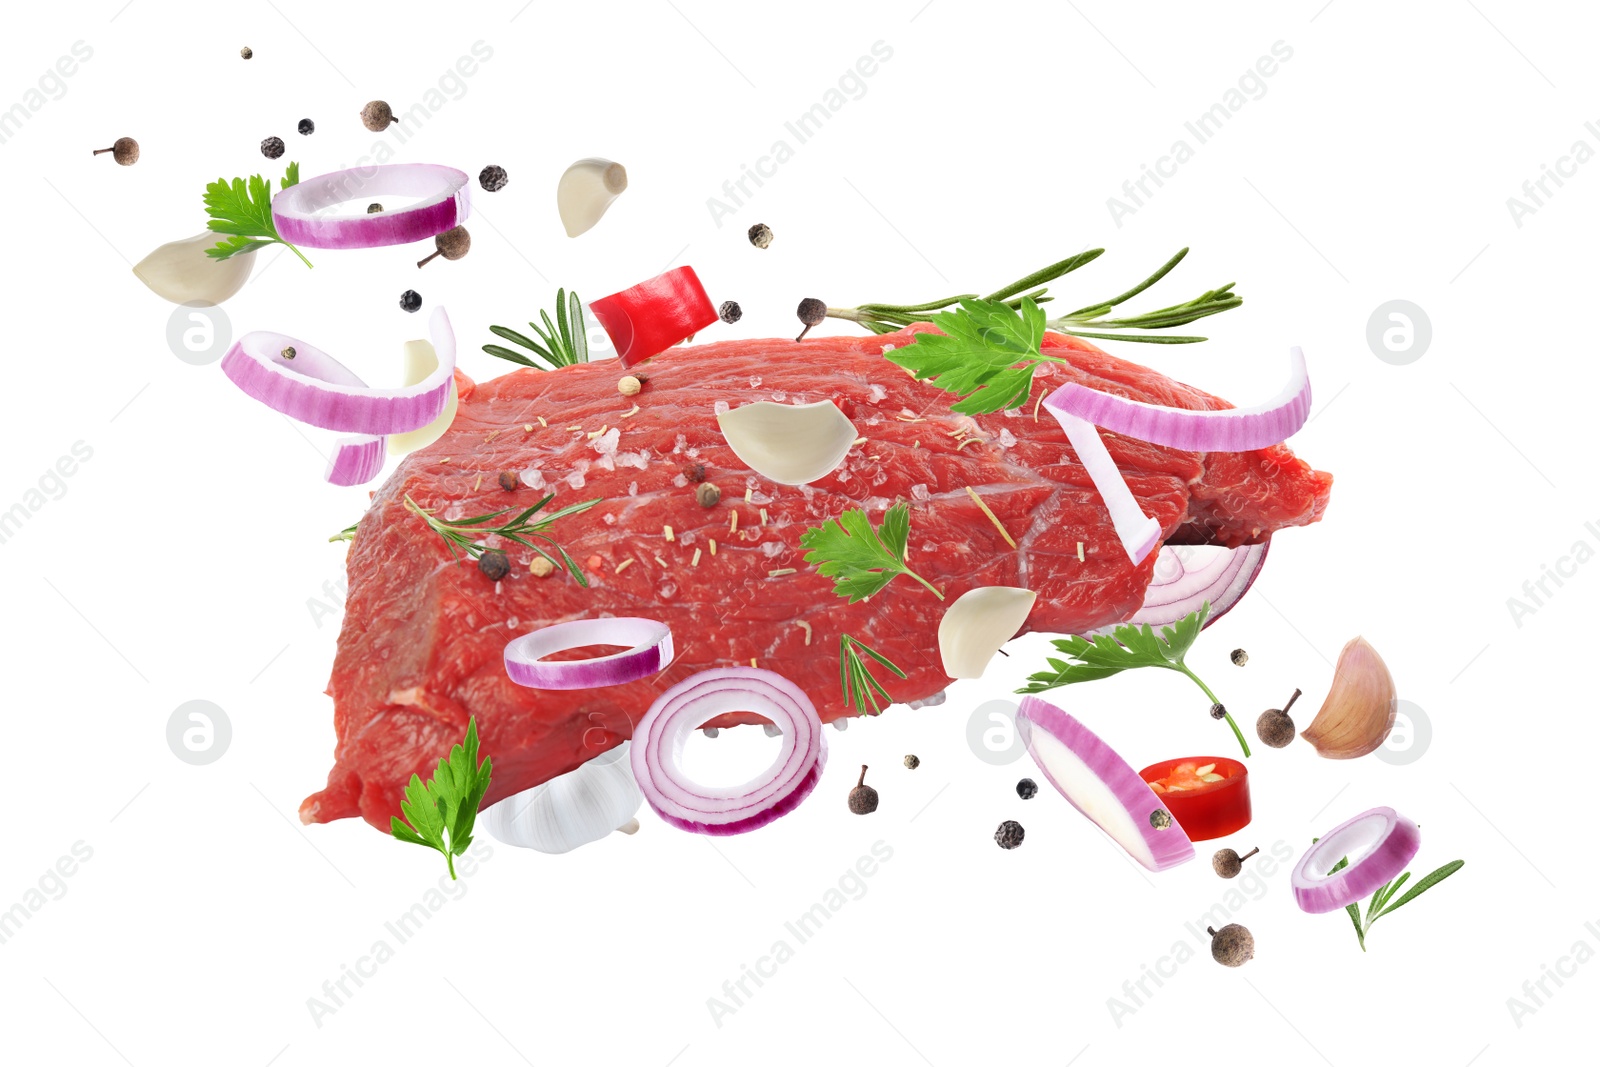 Image of Fresh raw meat and different spices flying on white background